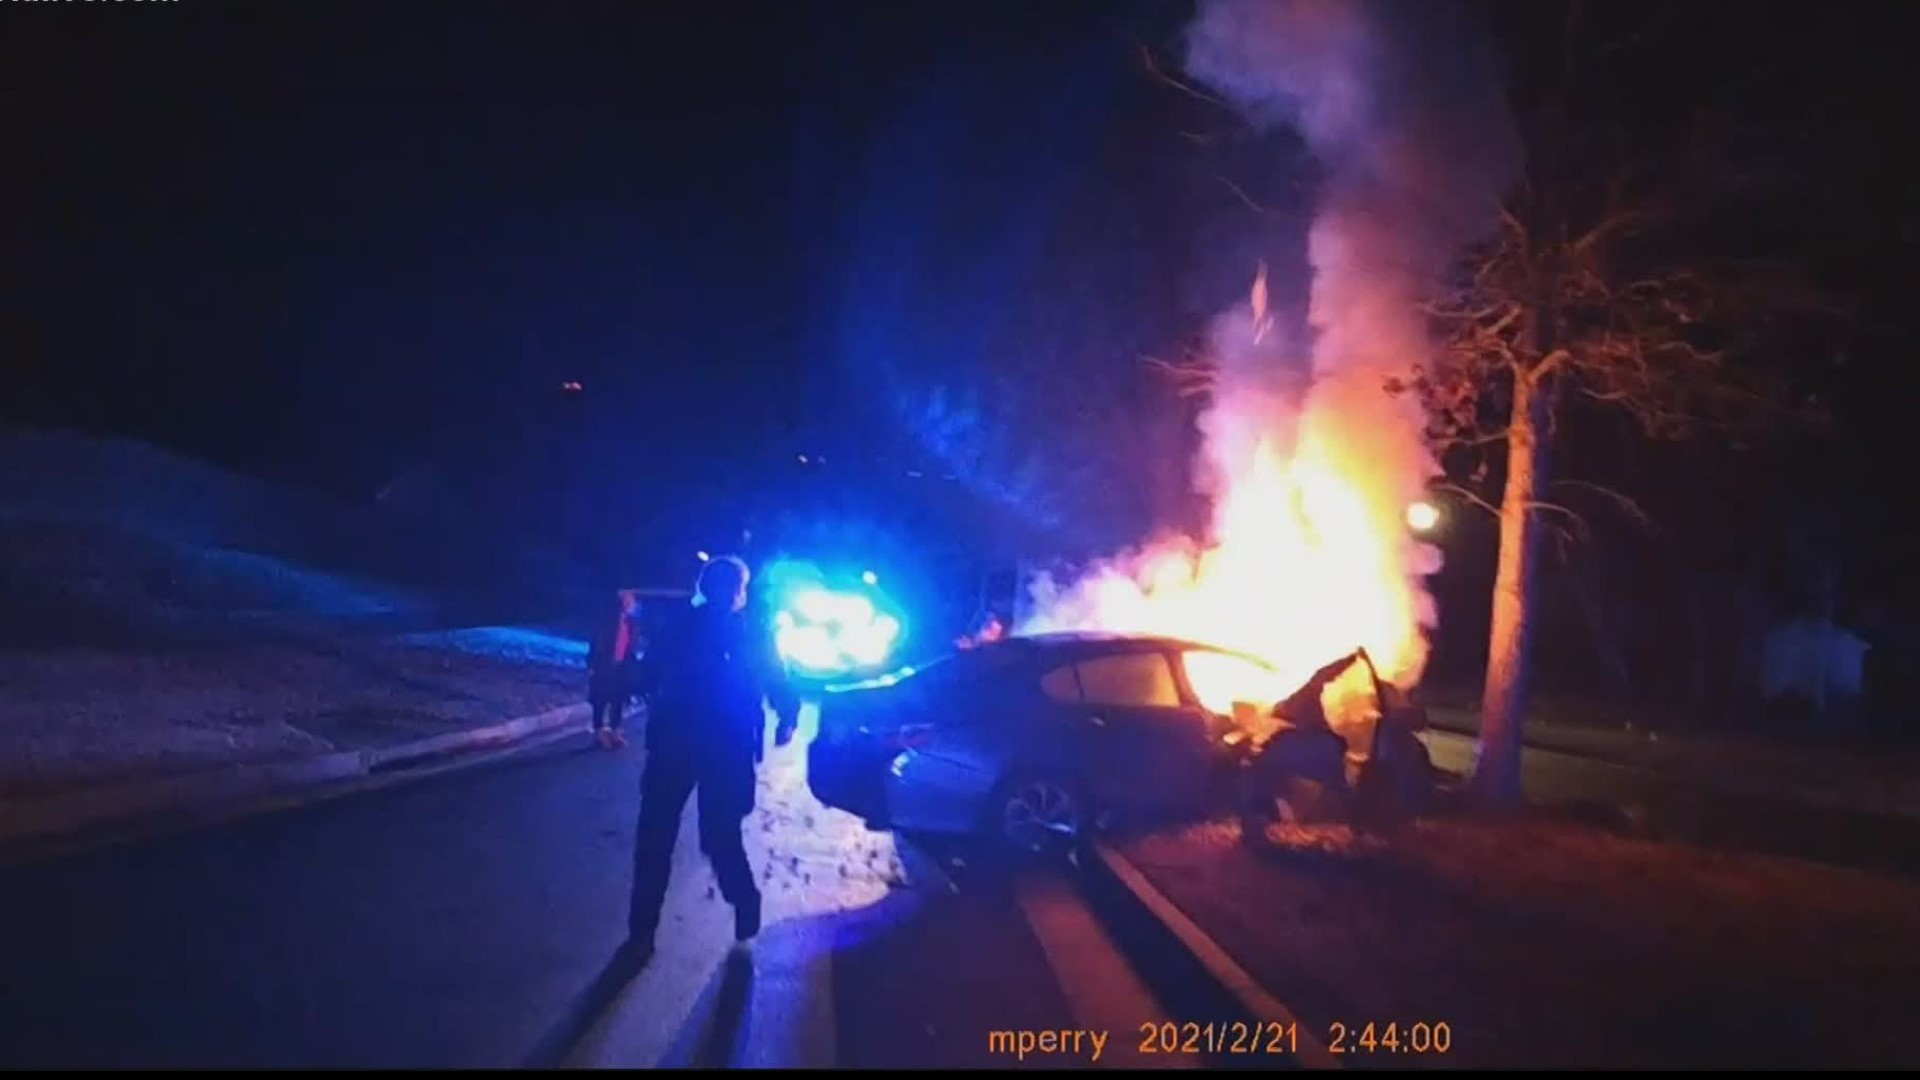 The dramatic rescue was caught on body cam video, as Fayetteville Police officers save a passenger from a fiery crash.